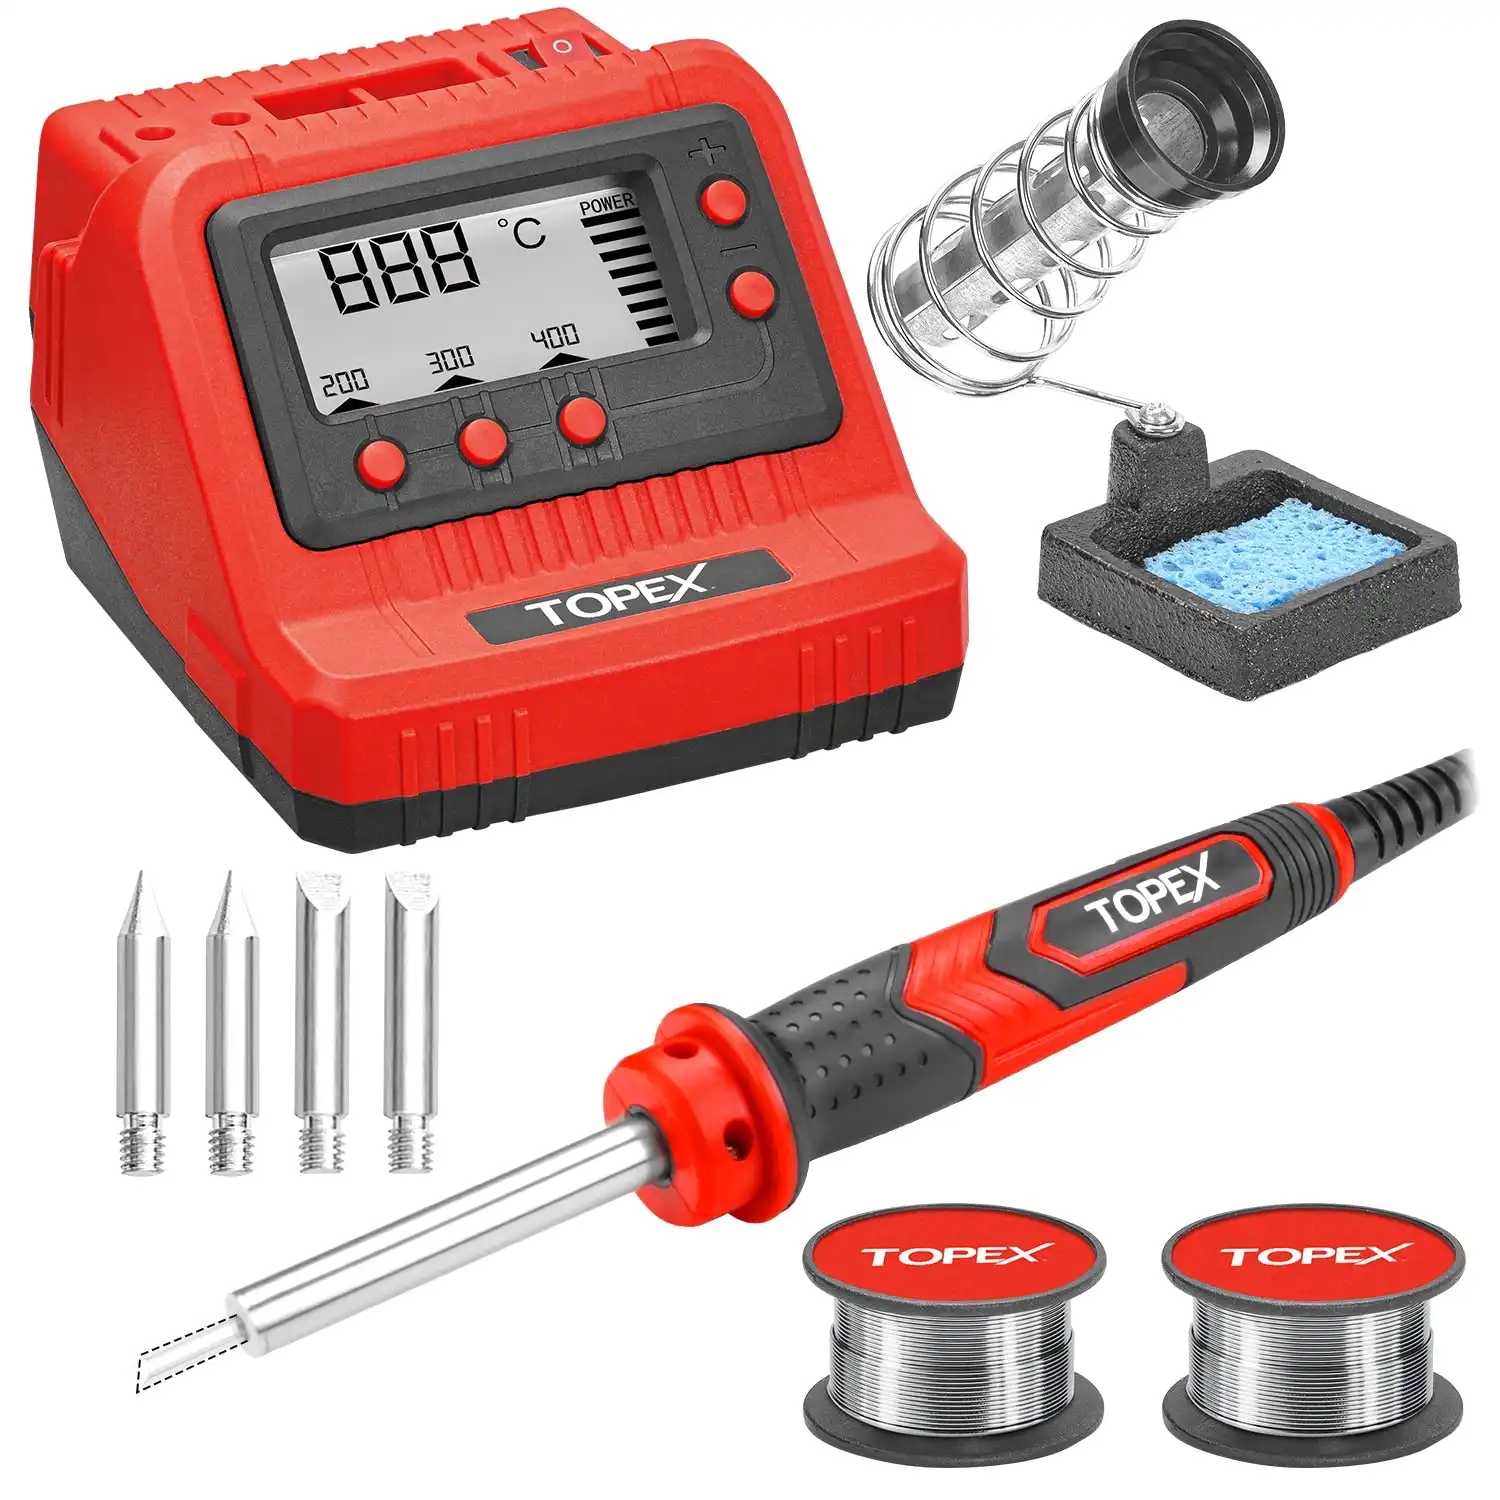 Topex 60W digital soldering Iron Station Solder Fast Heat Variable Temperature LED Display